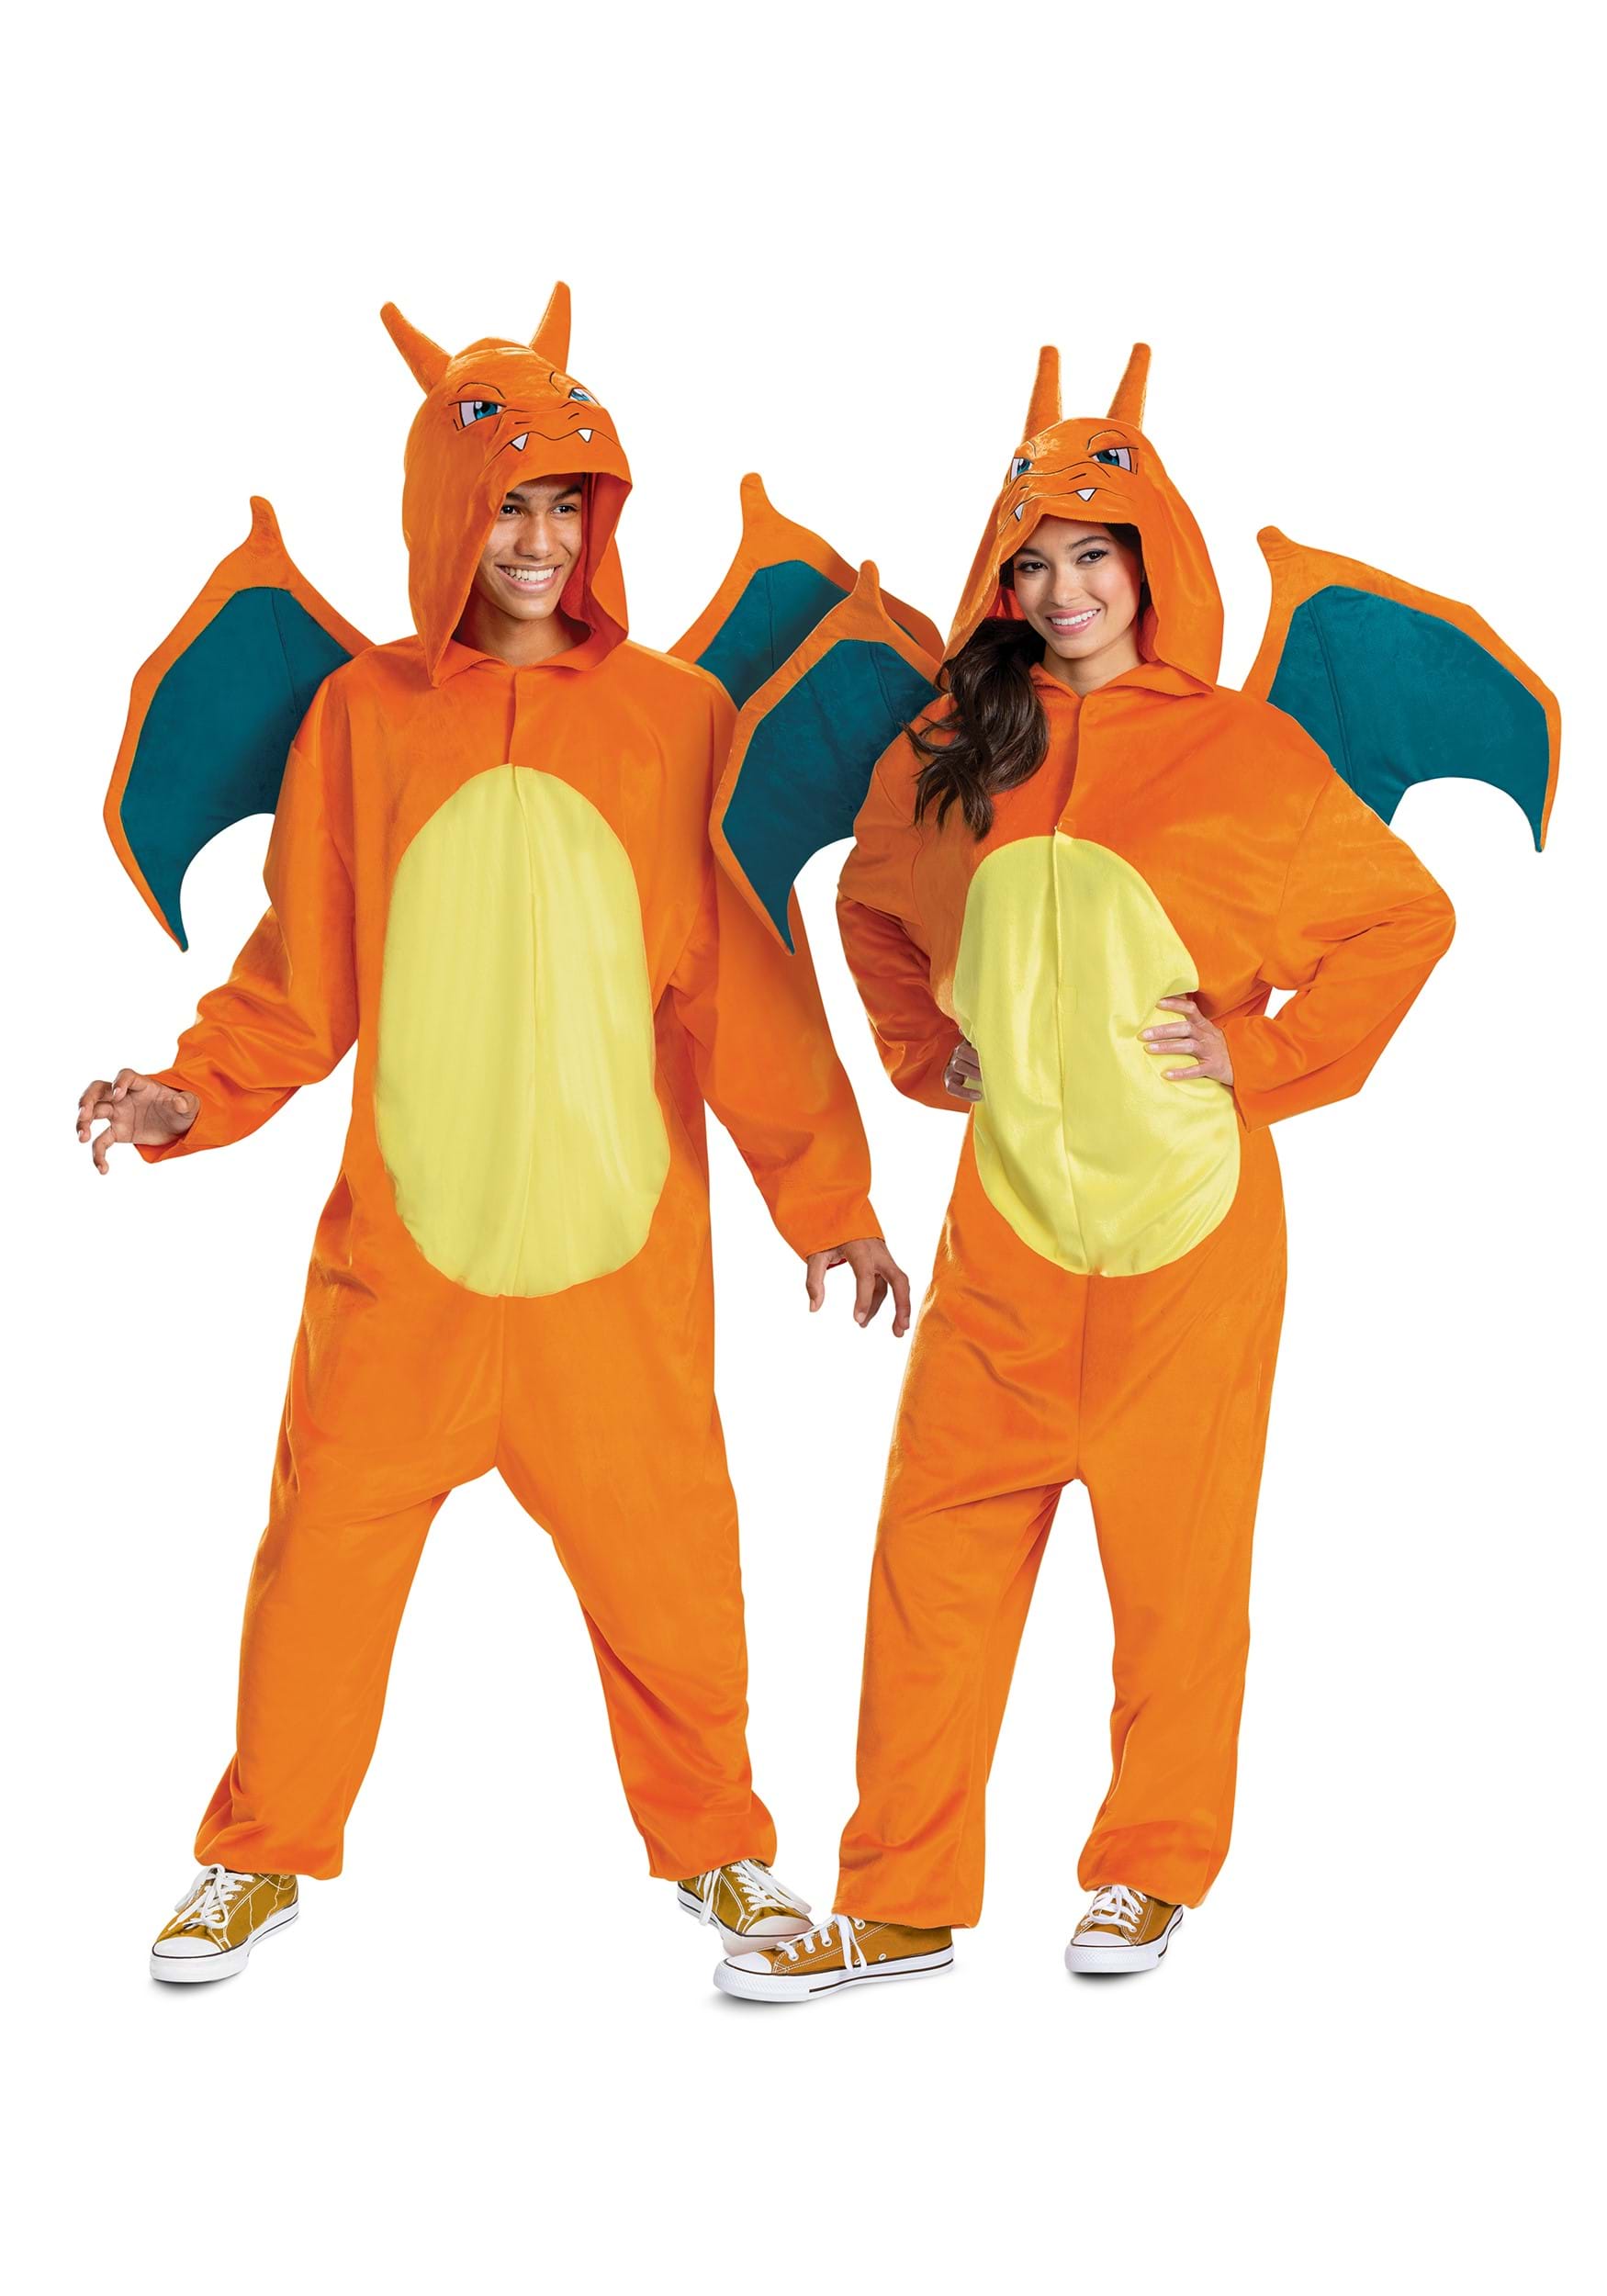 https://images.fun.com/products/83799/1-1/adult-pokemon-adult-charizard-deluxe-costume.jpg